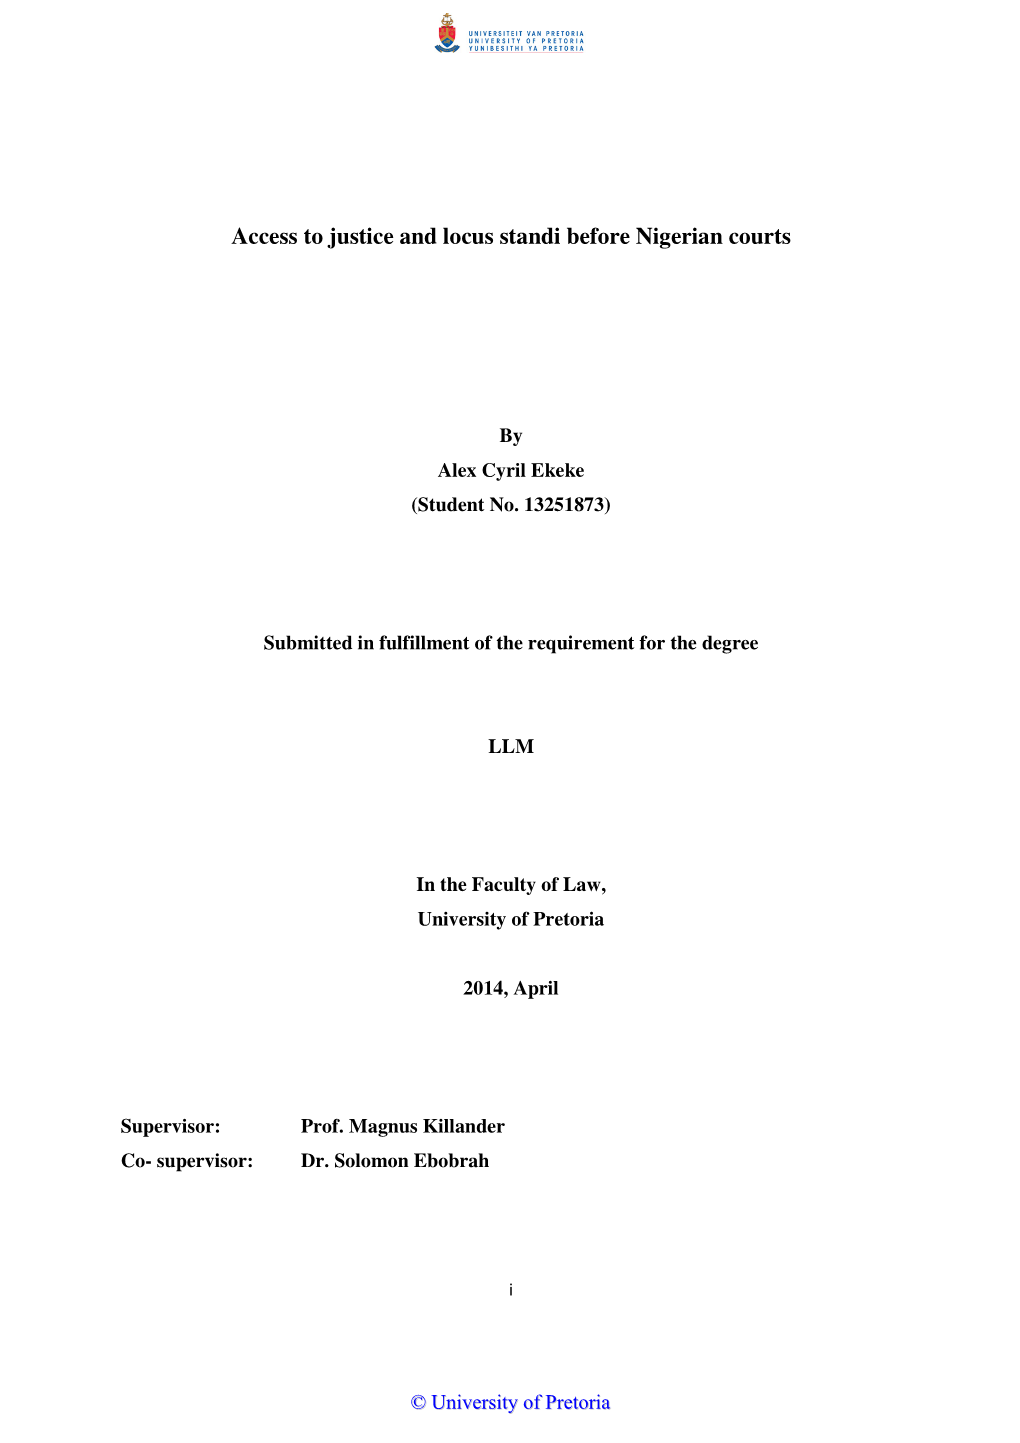 Access to Justice and Locus Standi Before Nigerian Courts